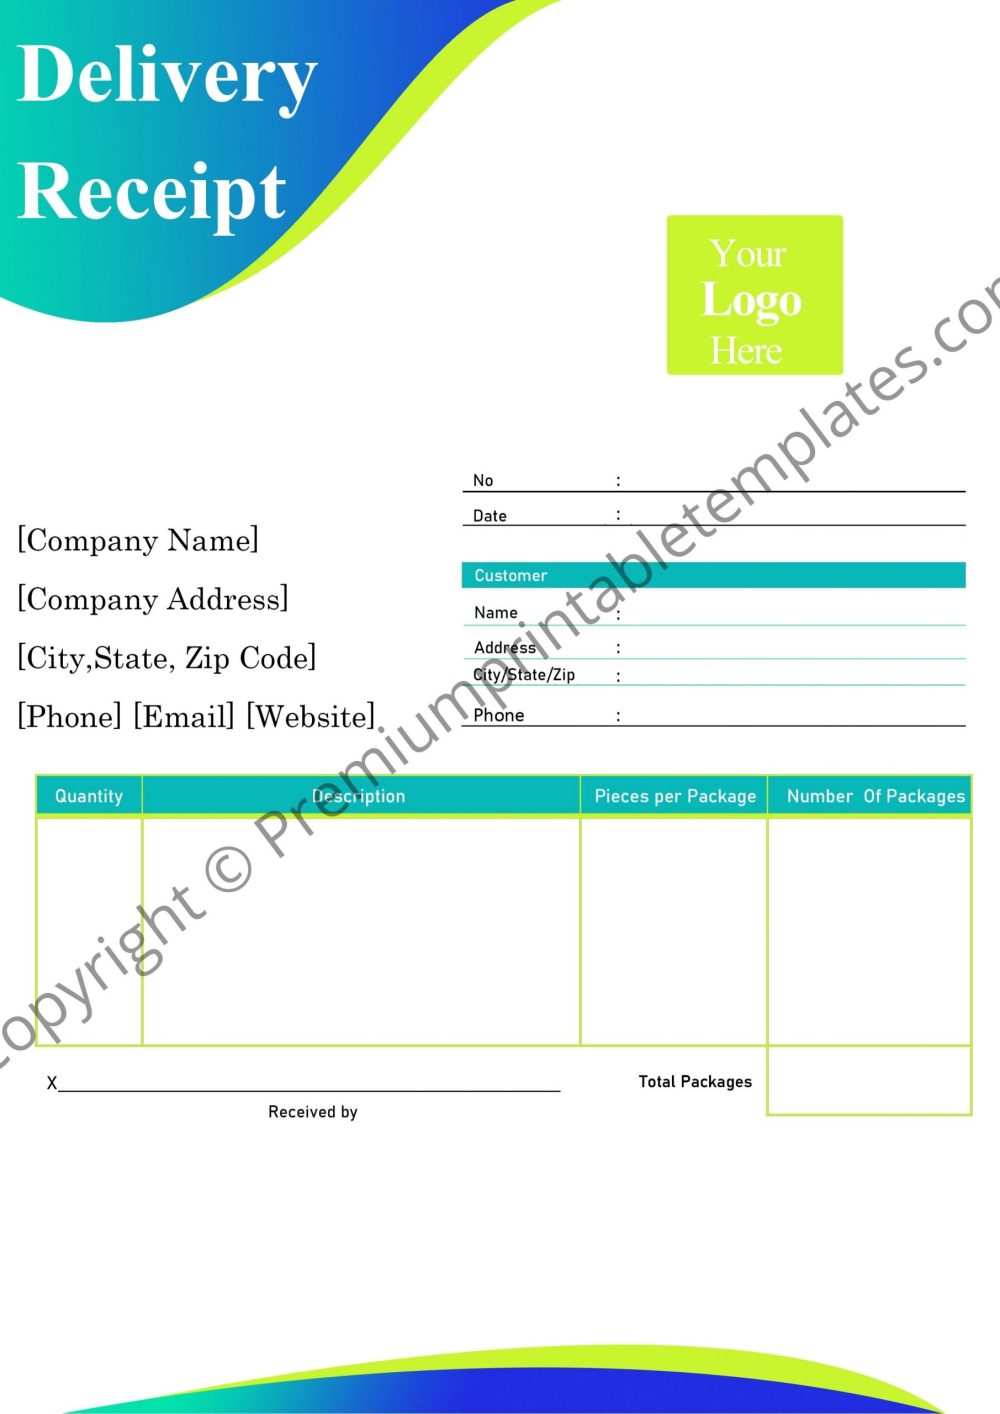 delivery receipt sample pdf